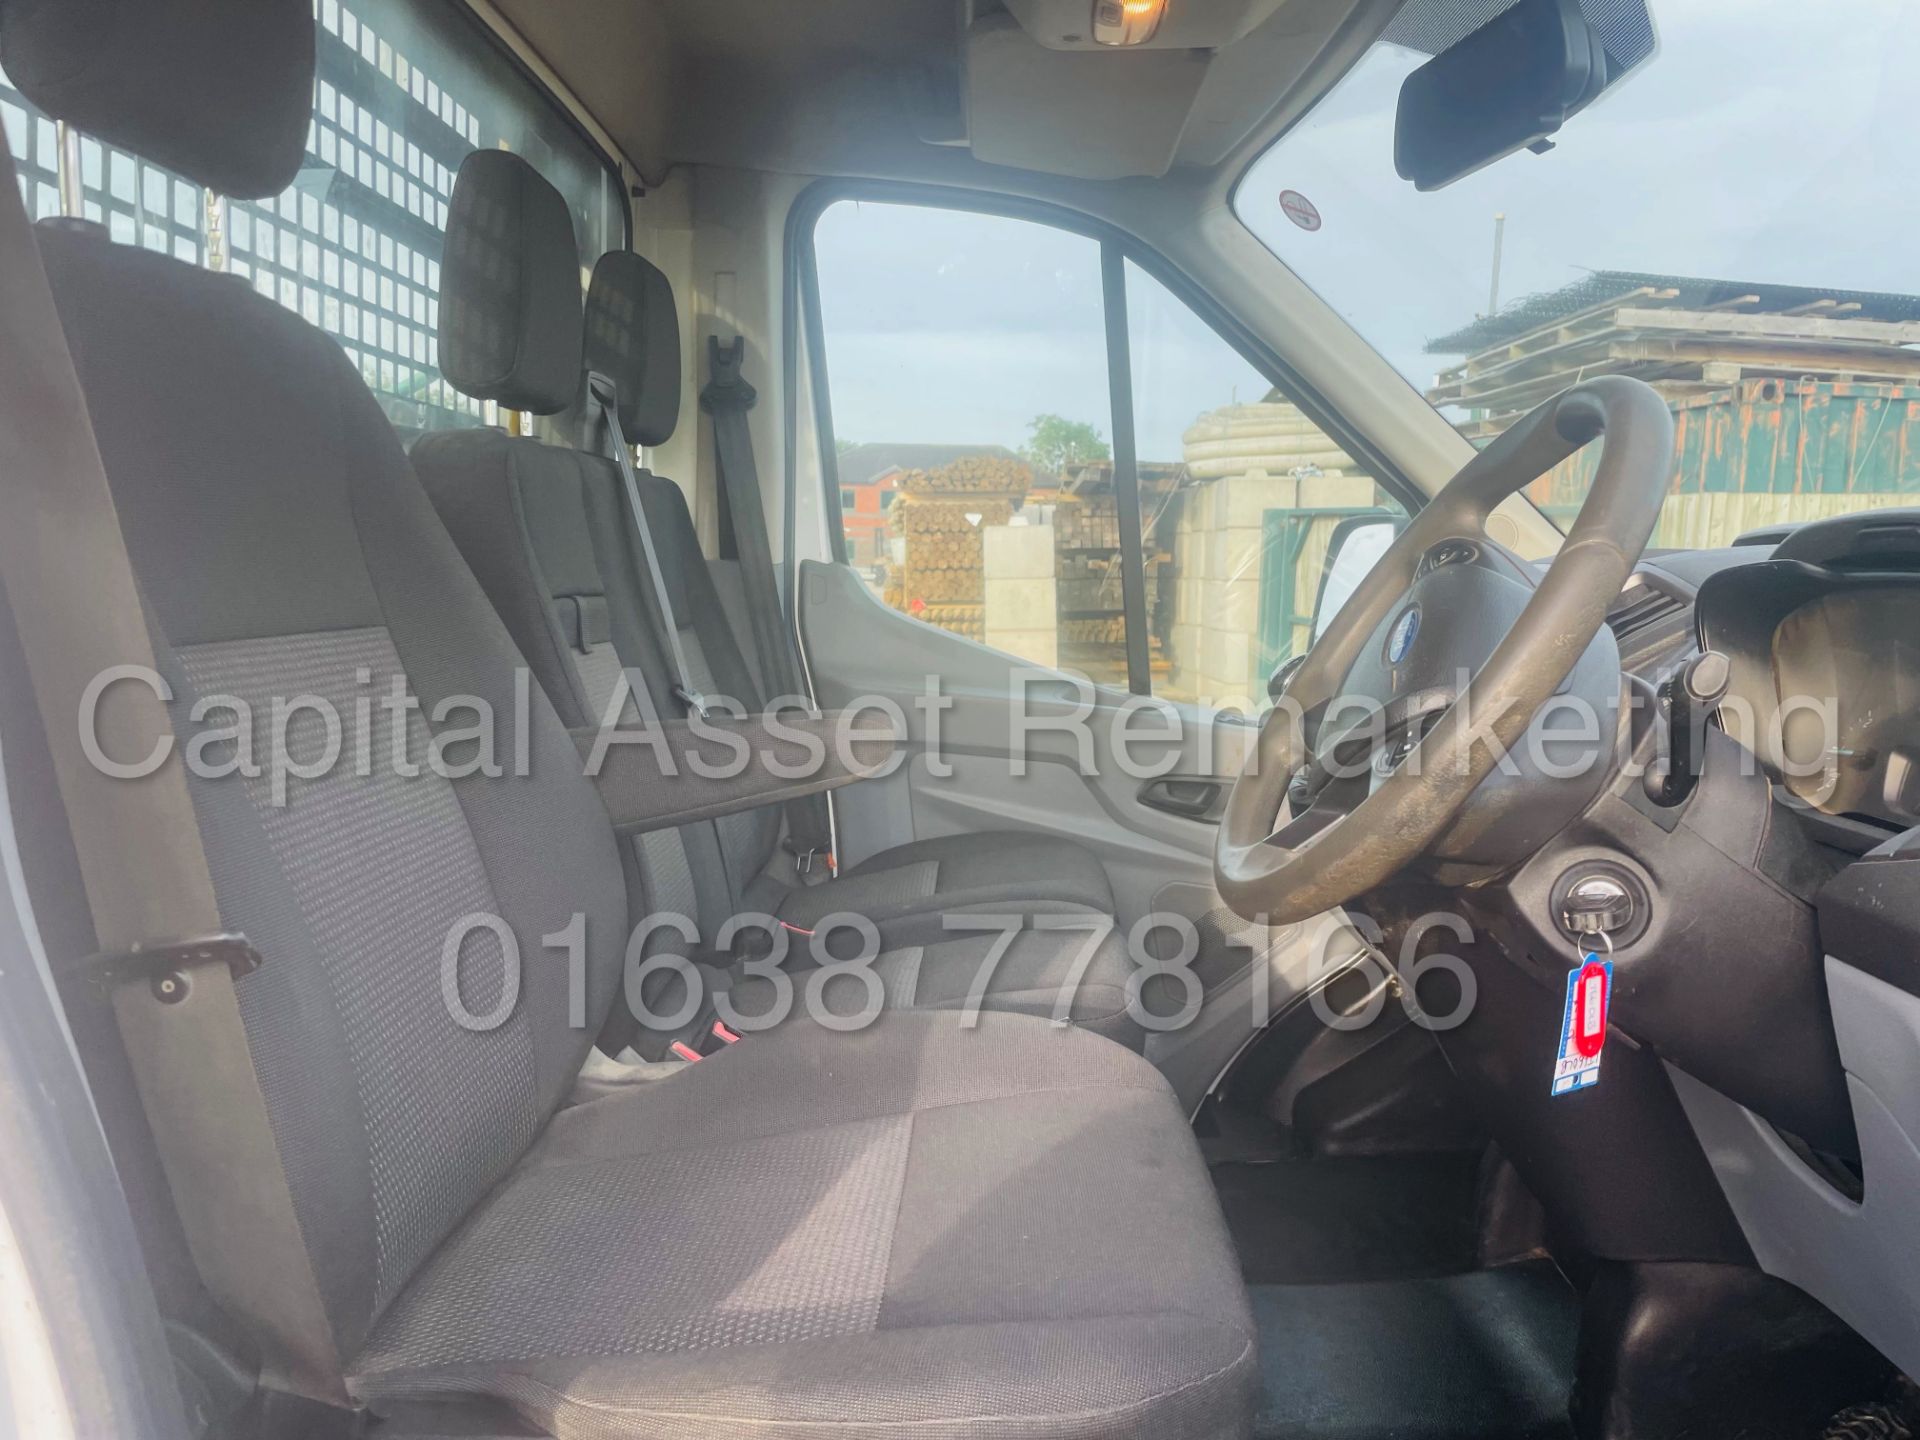 (On Sale) FORD TRANSIT 125 T350 *L4 - XLWB DROPSIDE TRUCK* (2017 - EURO 6) '2.2 TDCI - 6 SPEED' - Image 27 of 40